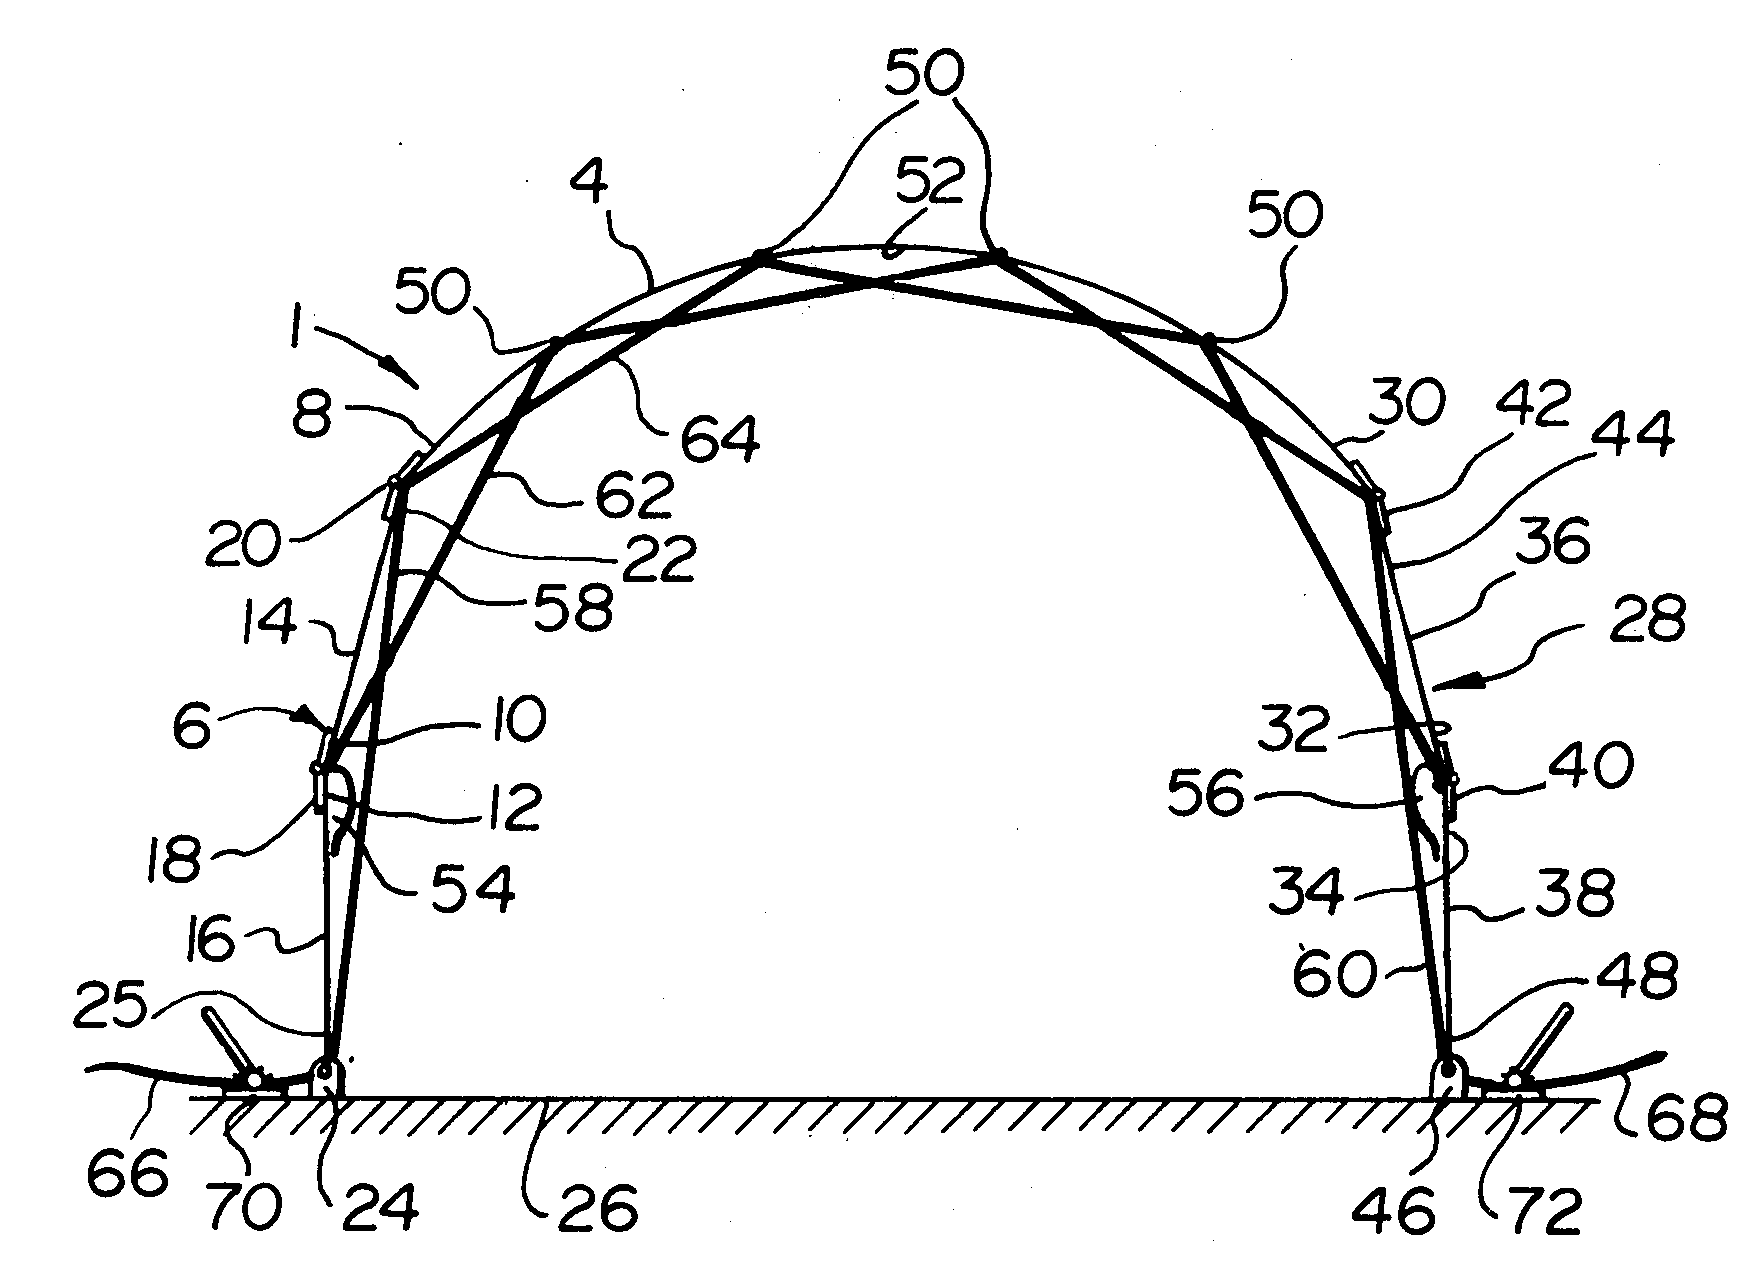 us4373305(a)_arch forming structure未知